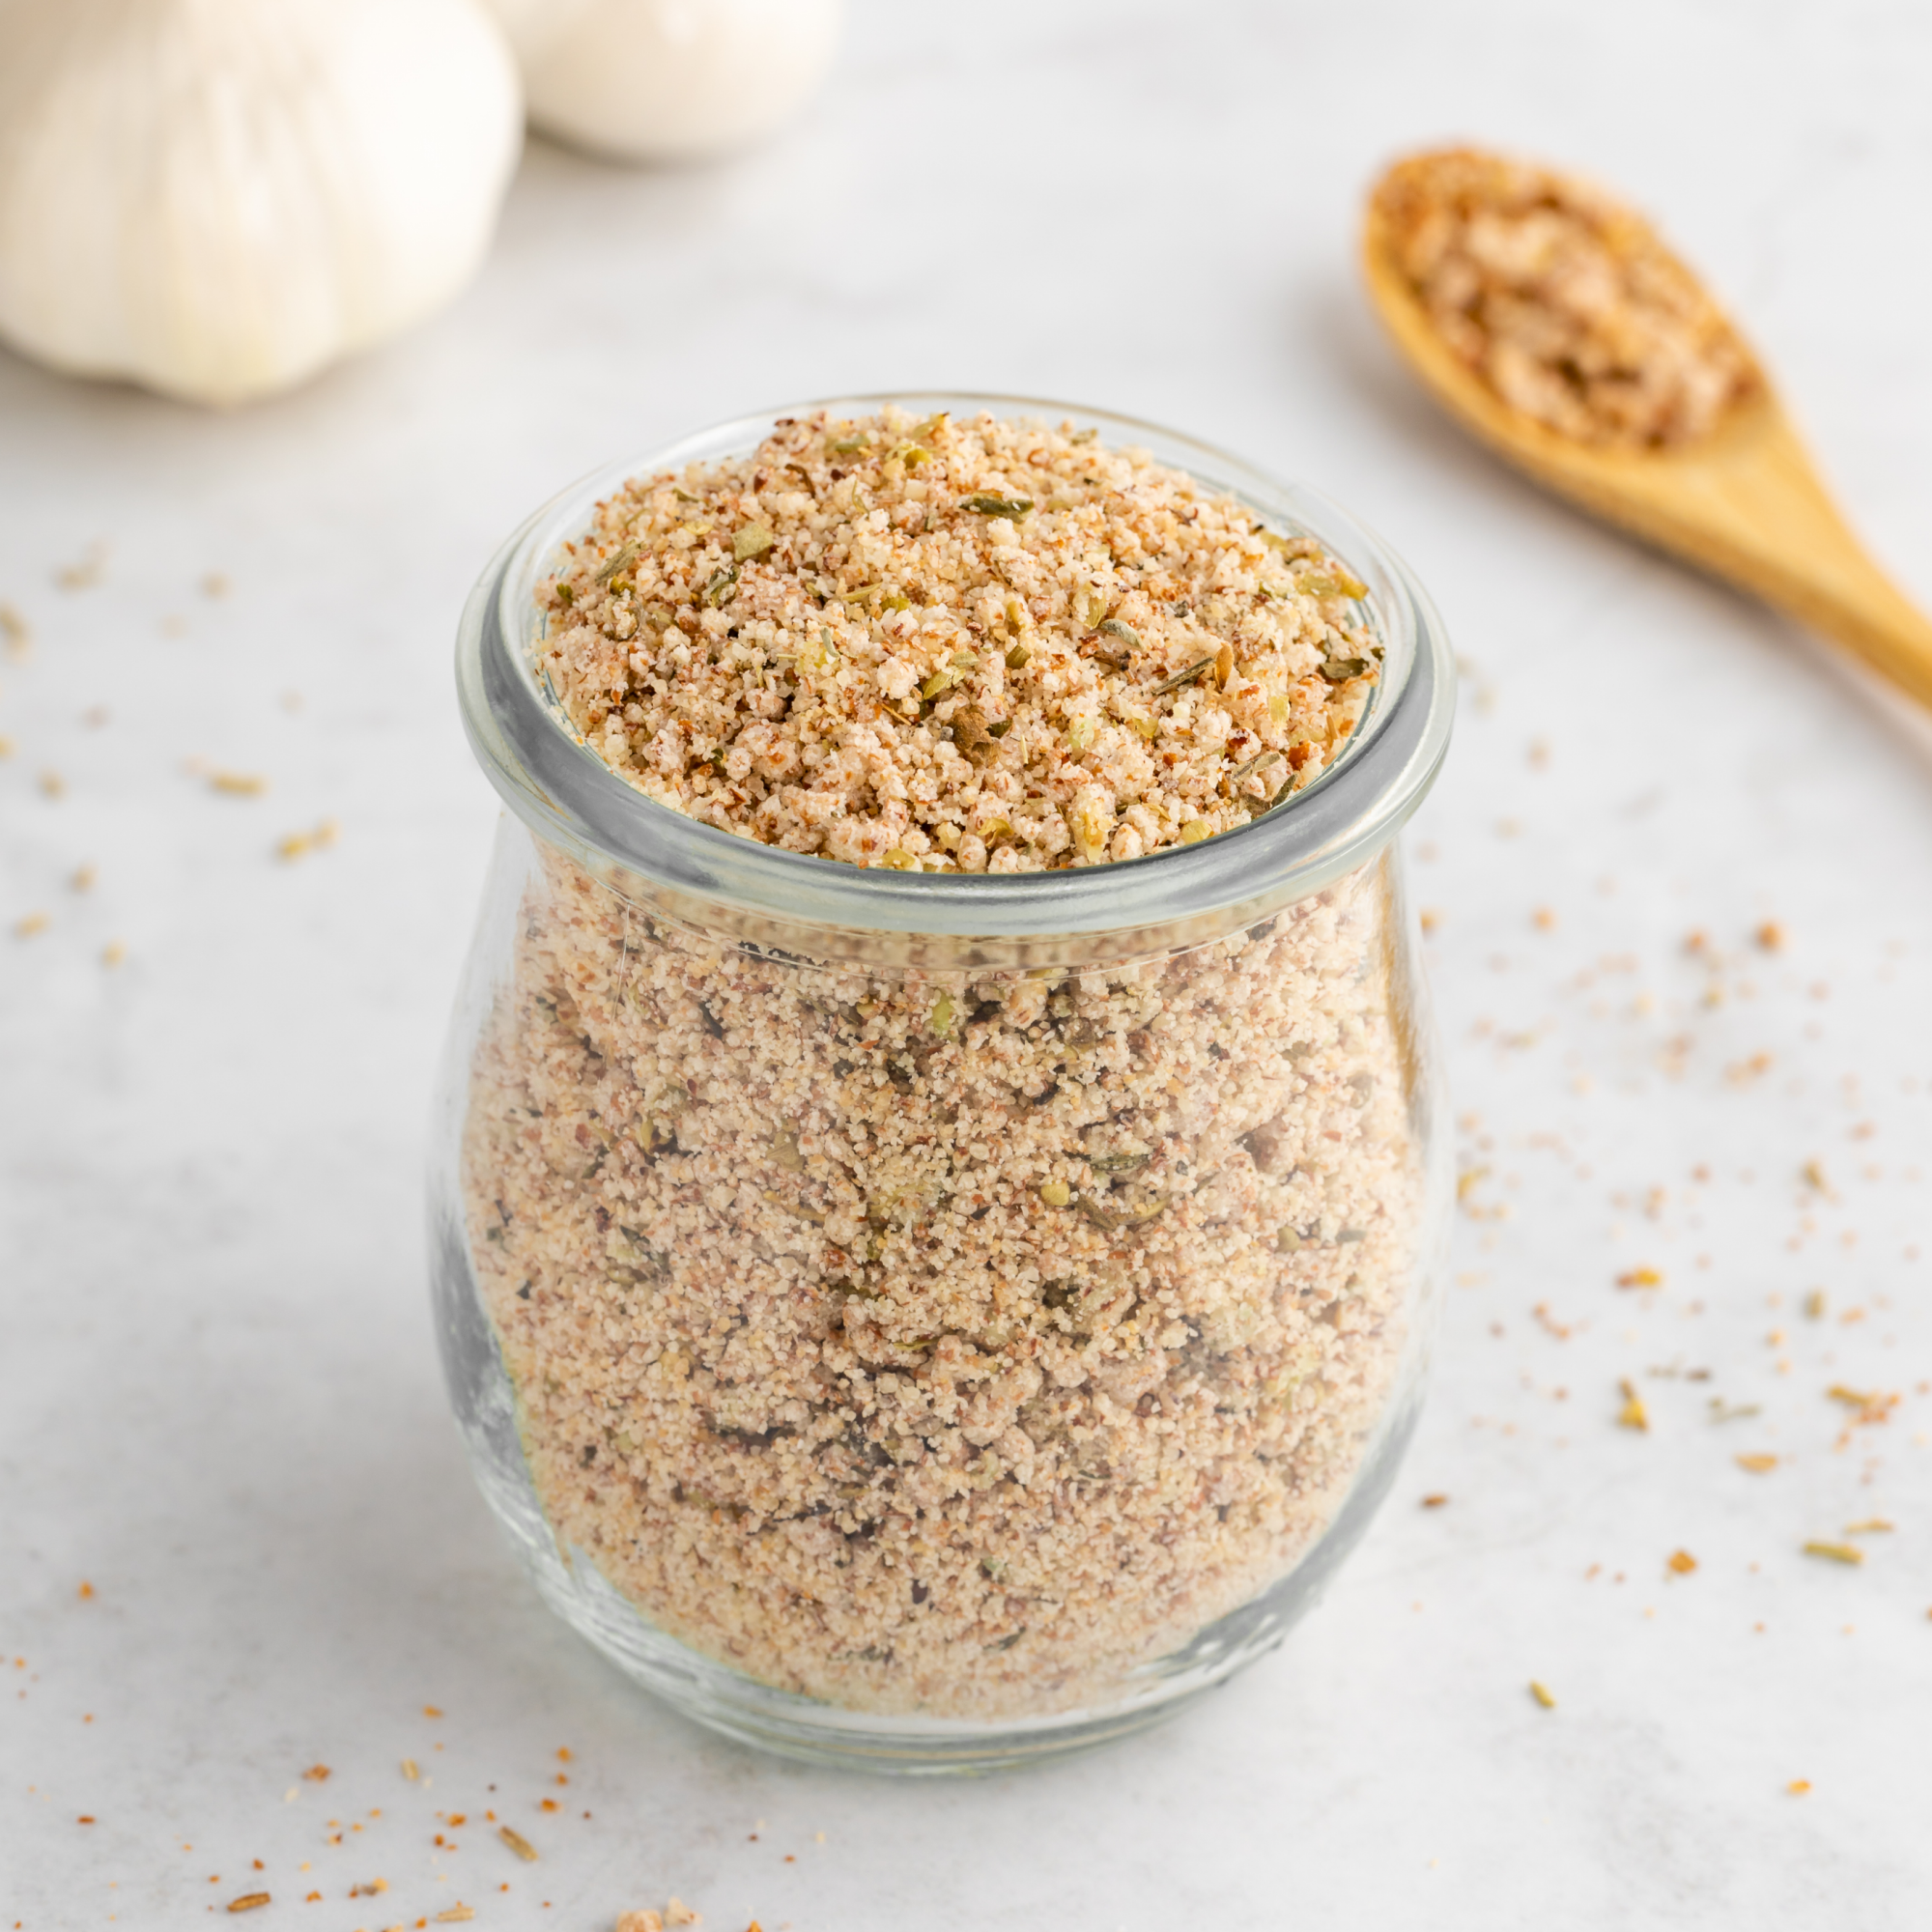 Garlic Herb Almond Pulp Breadcrumbs made from leftover almond pulp from the Almond Cow